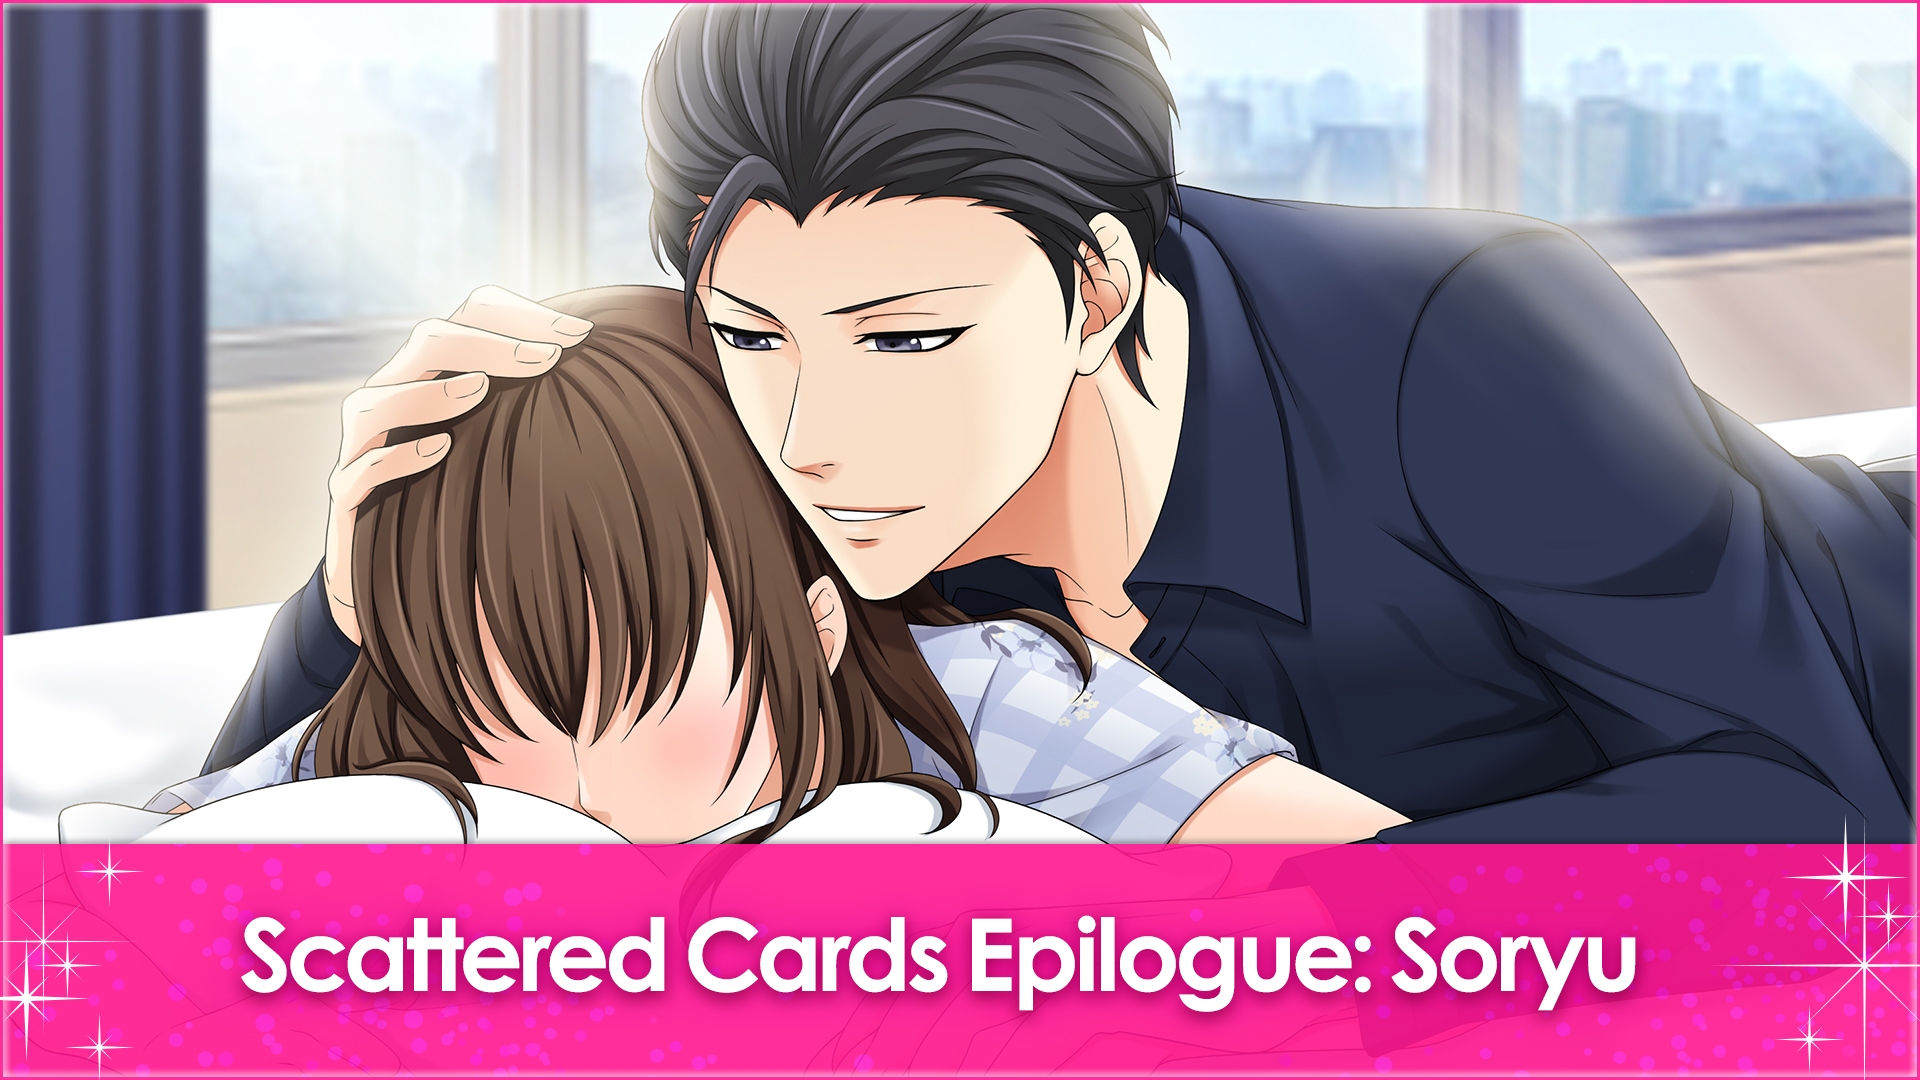 Scattered Cards Epilogue: Soryu